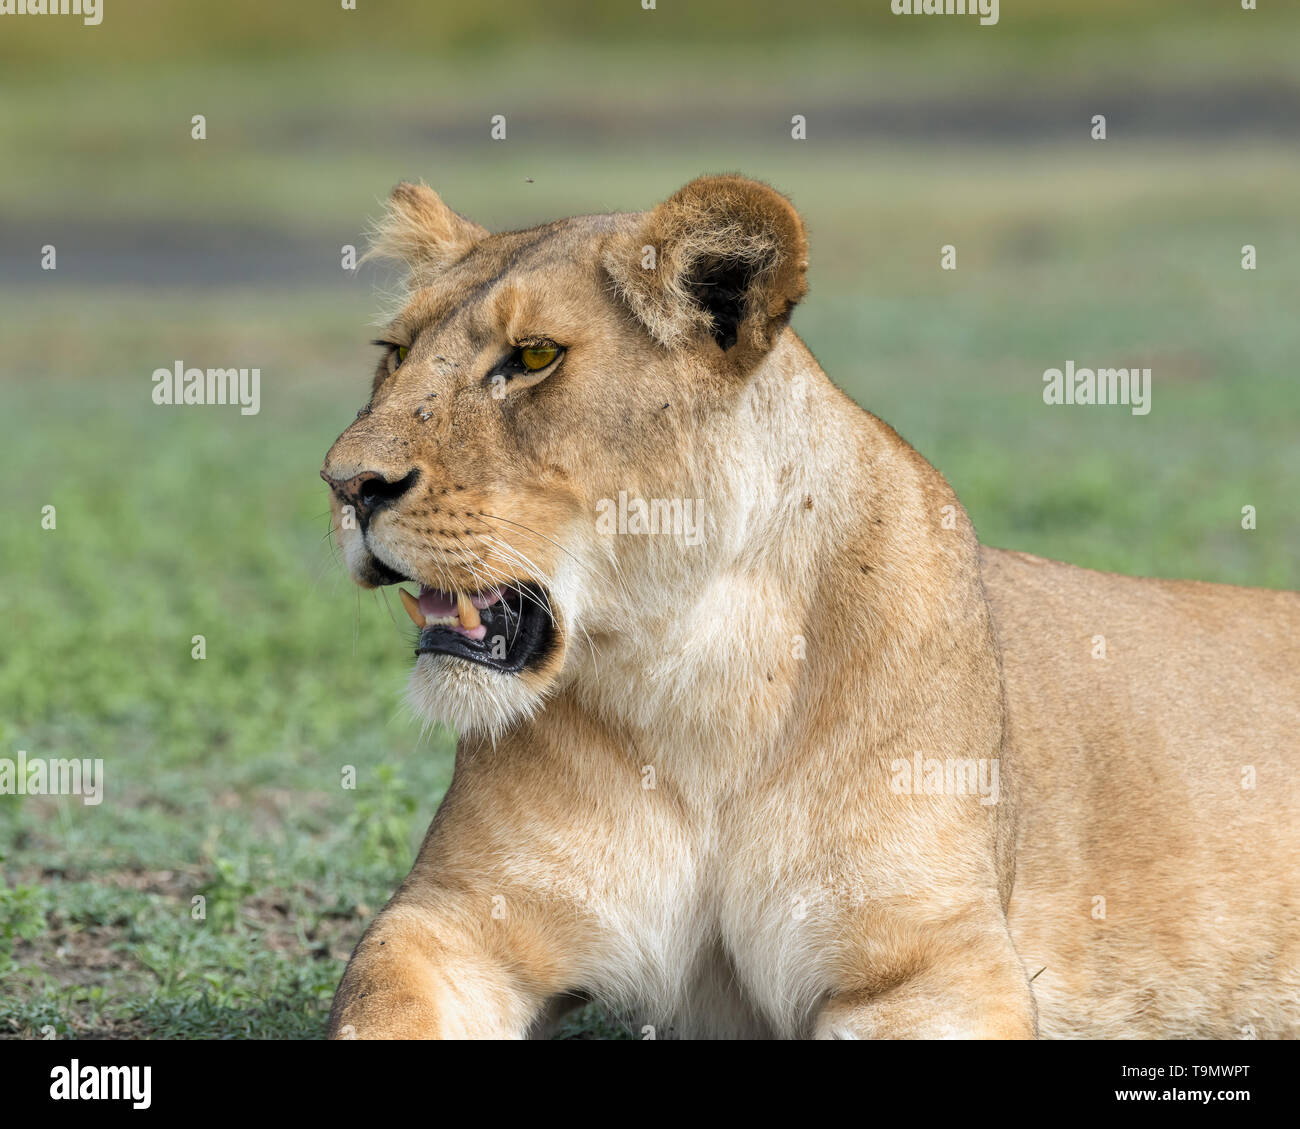 Lioness with flies on face and open mouth, Lake Ndutu, Tanzania Stock Photo